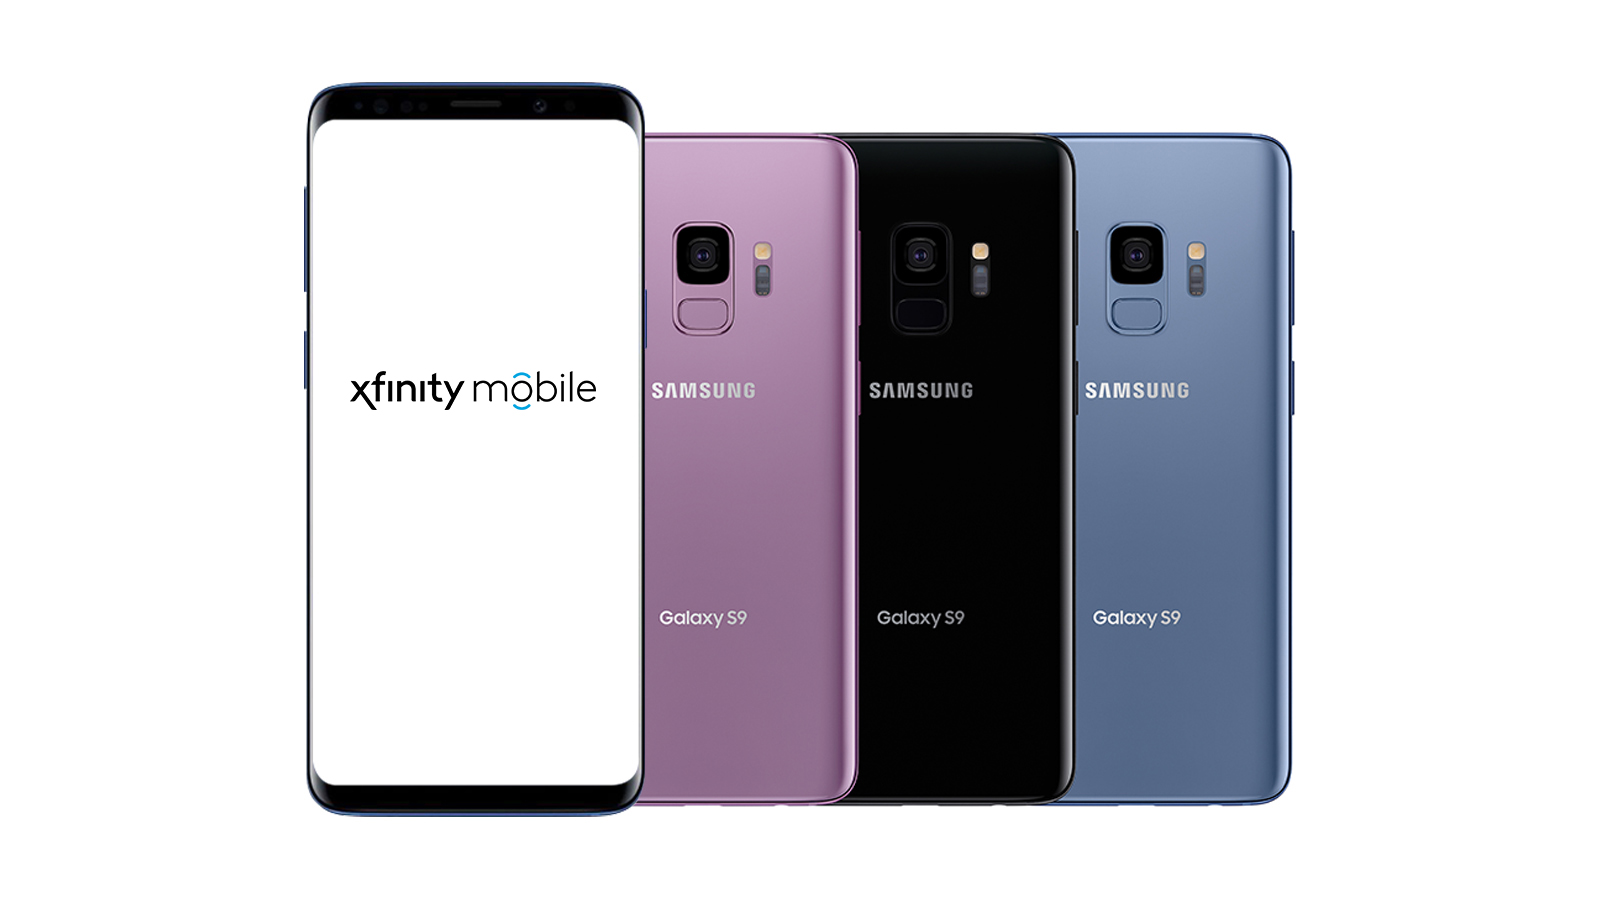 4 Samsung Galaxy S9 phones lined up.